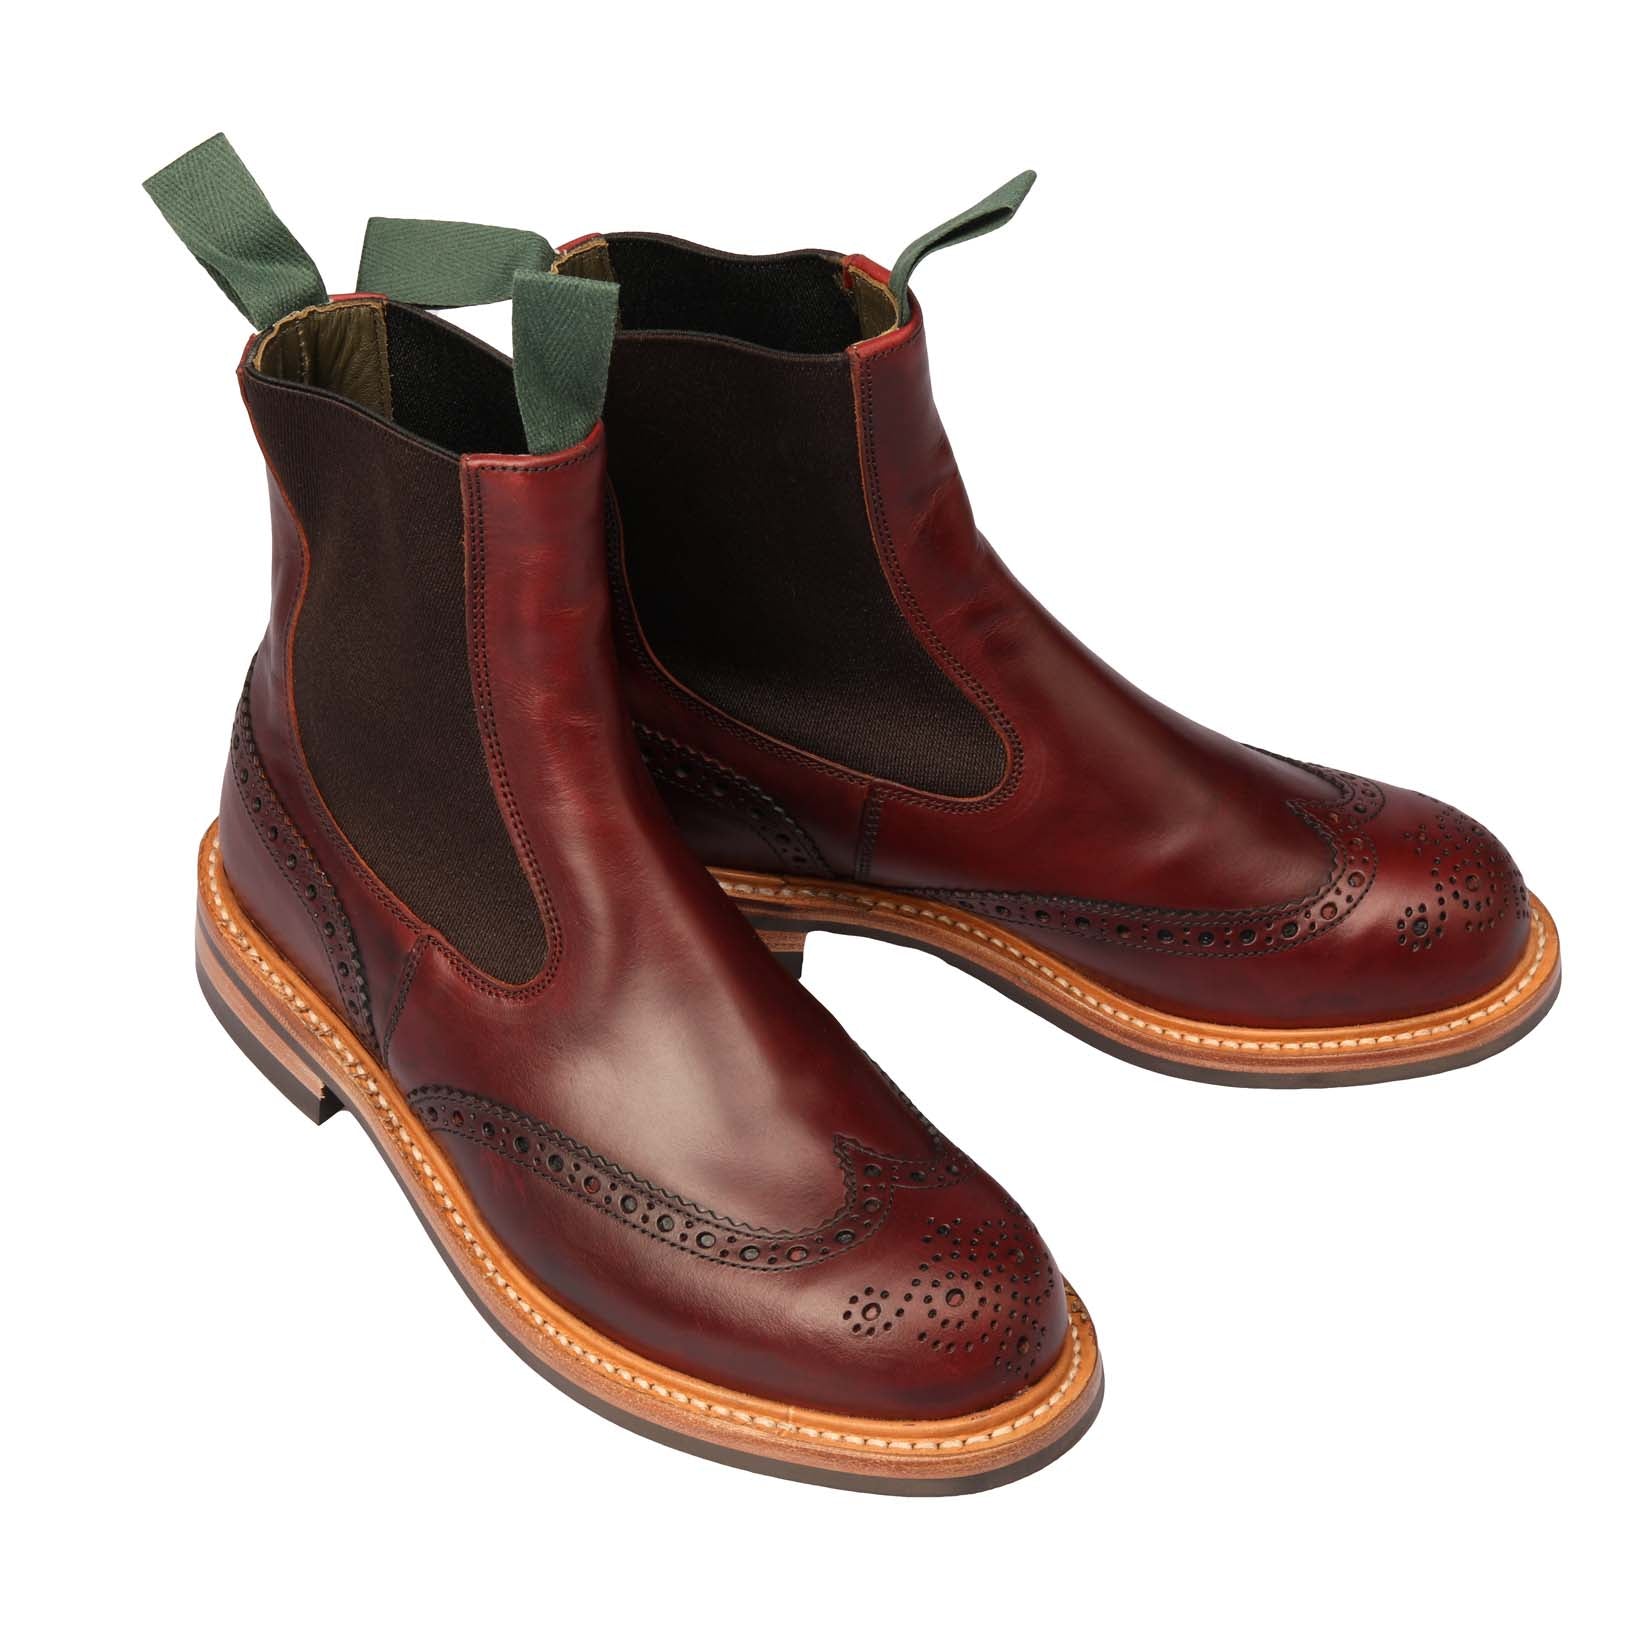 Silvia Brouge boot-Tricker's-Conrad Hasselbach Shoes & Garment